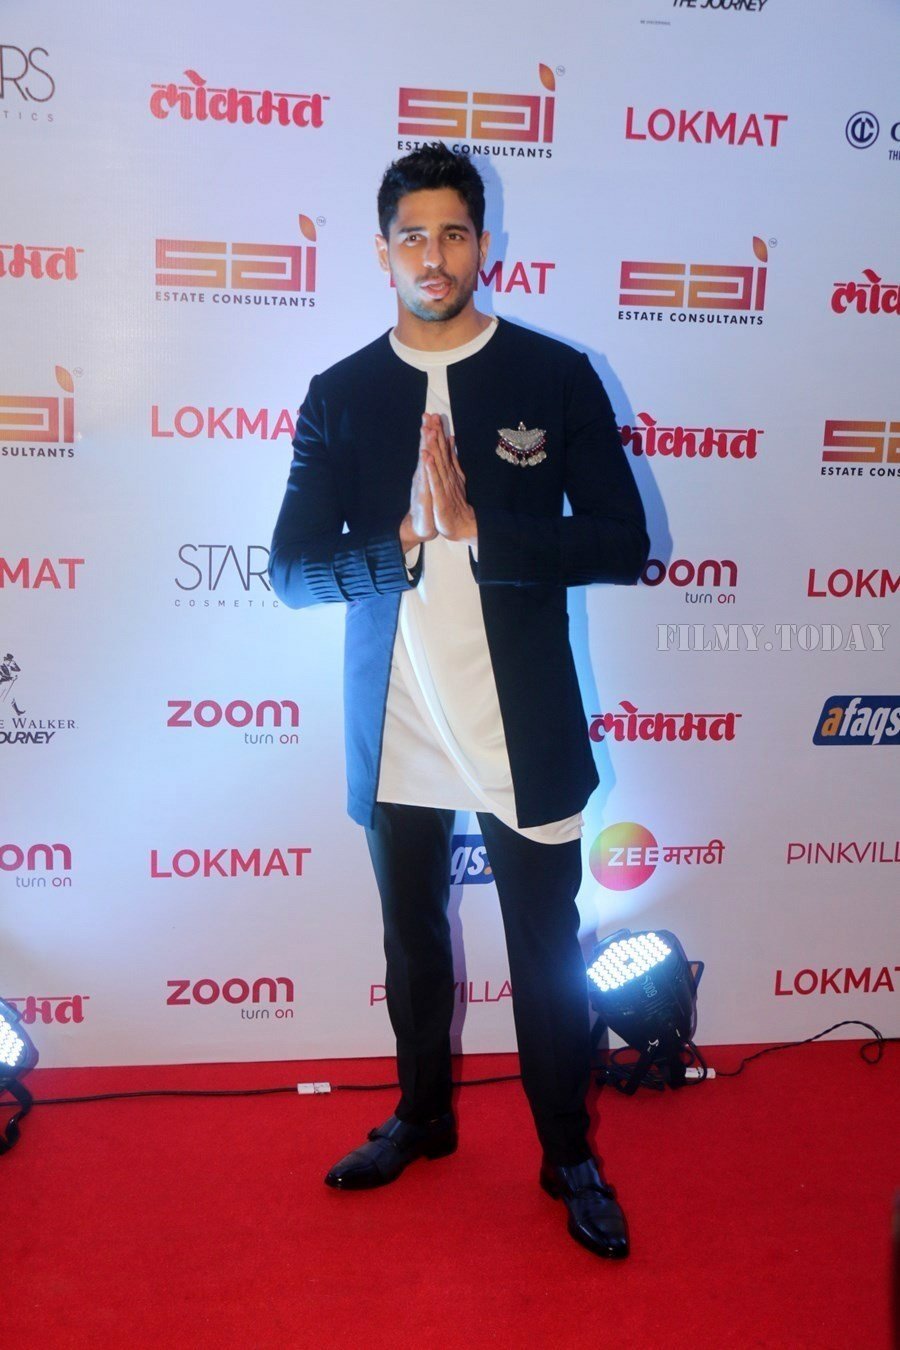 Sidharth Malhotra - In Pics: Red Carpet Of 2nd Edition Of Lokmat Maharashtra's Most Stylish Awards 2017 | Picture 1544840